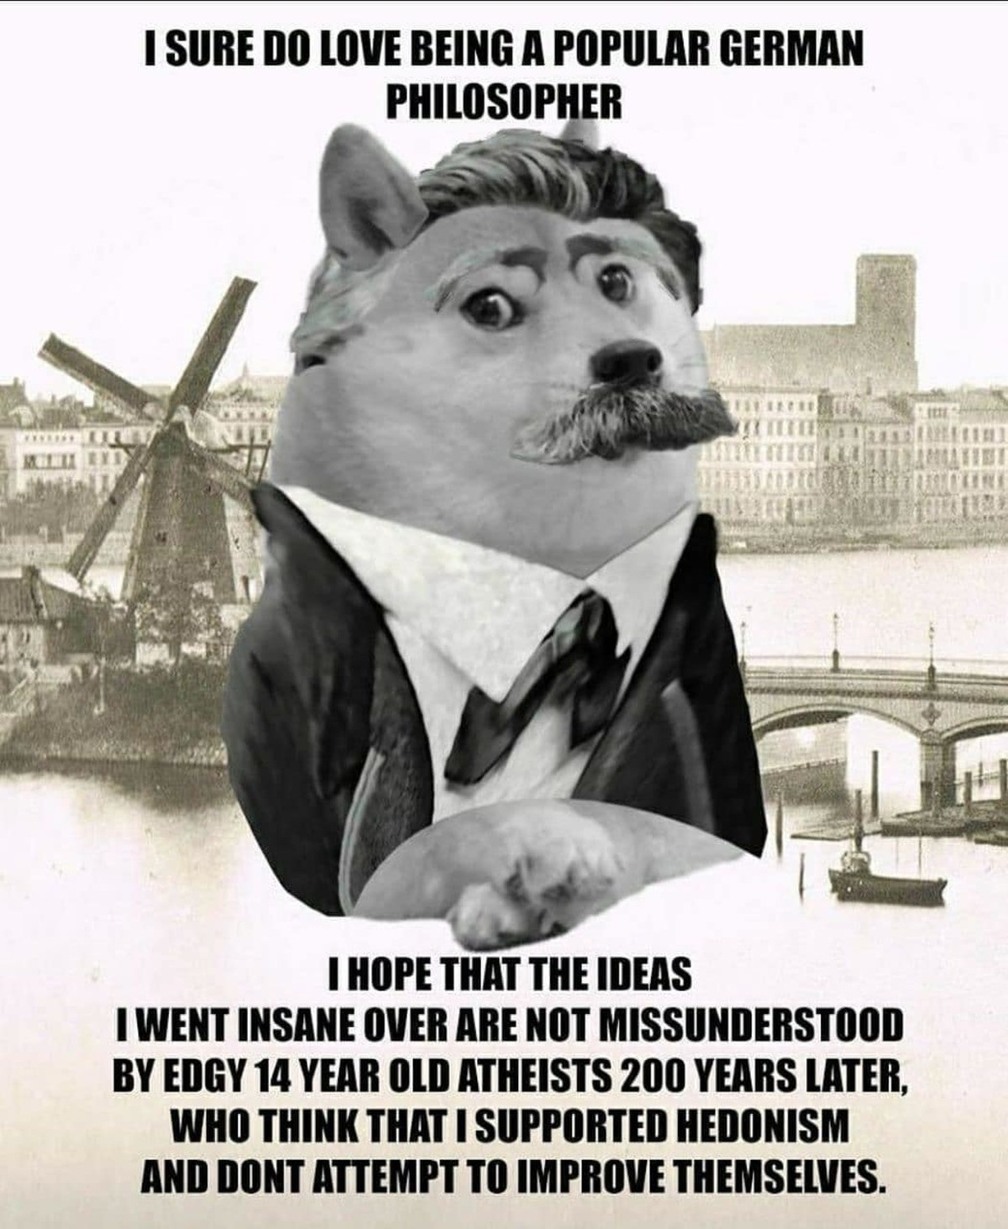 "Next, I wanna talk about existentialism. The idea that you shouldn't let the inherit meaninglessness of the universe crush your hope and will to find meaning." - Nietzsche - meme